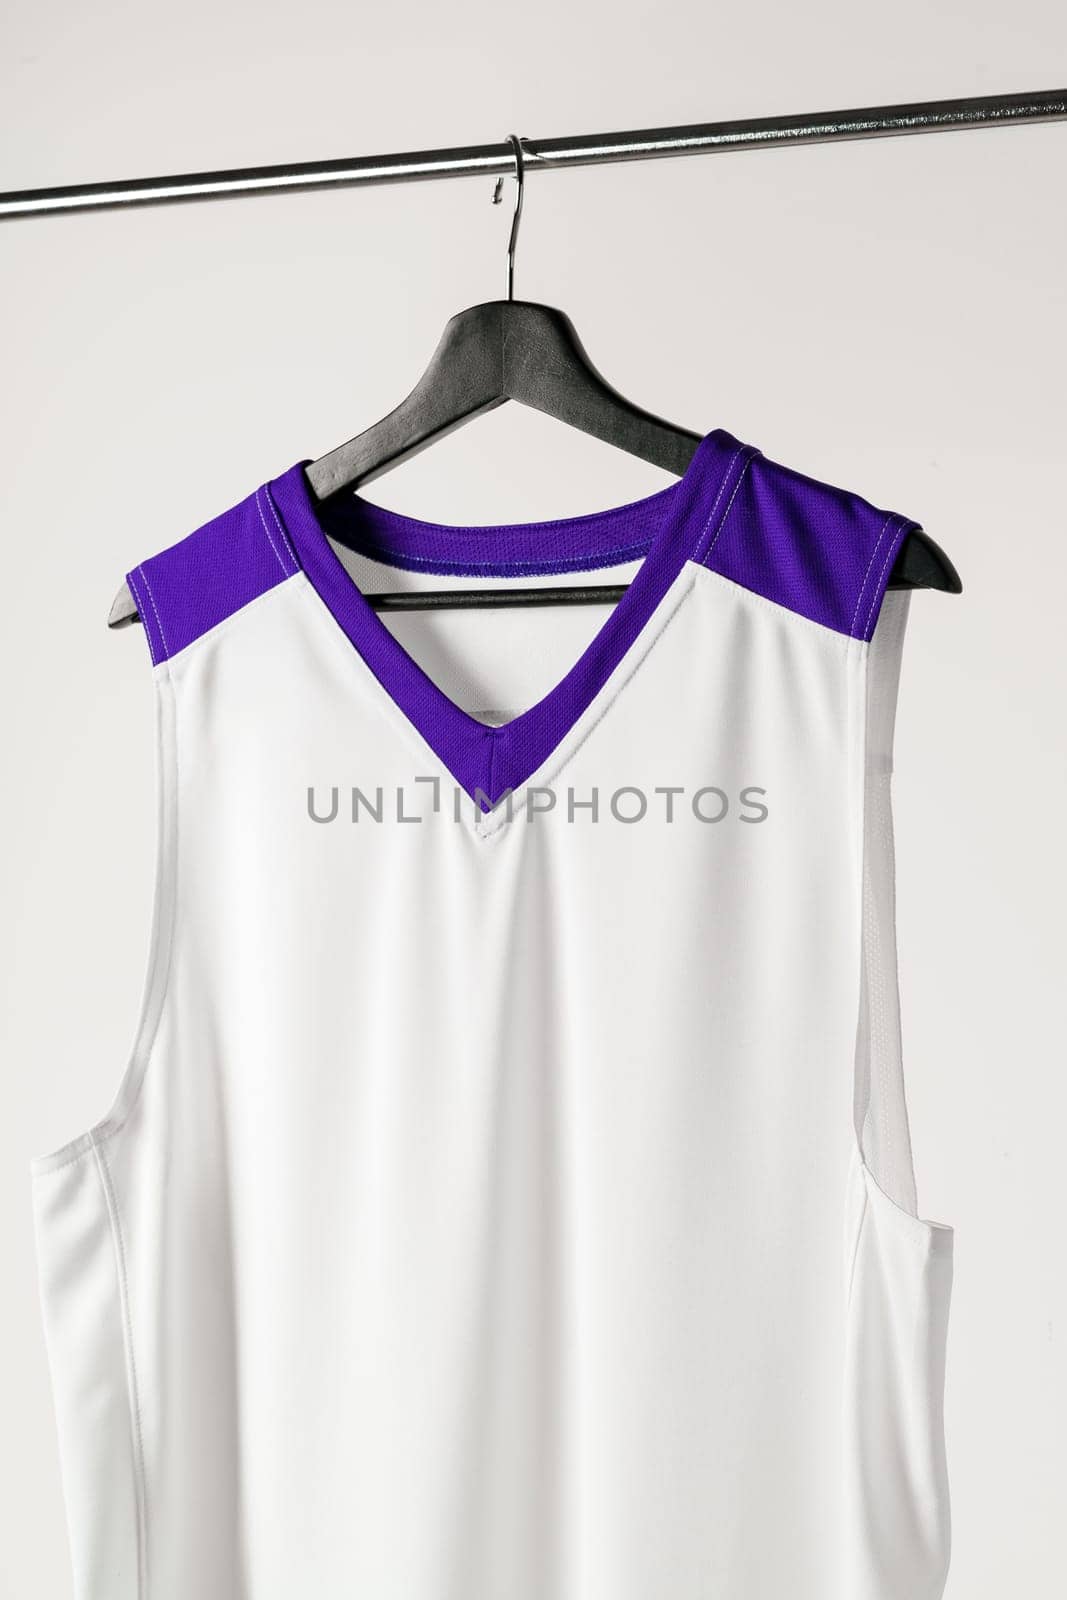 White basketball jersey hanging against white background by Fabrikasimf